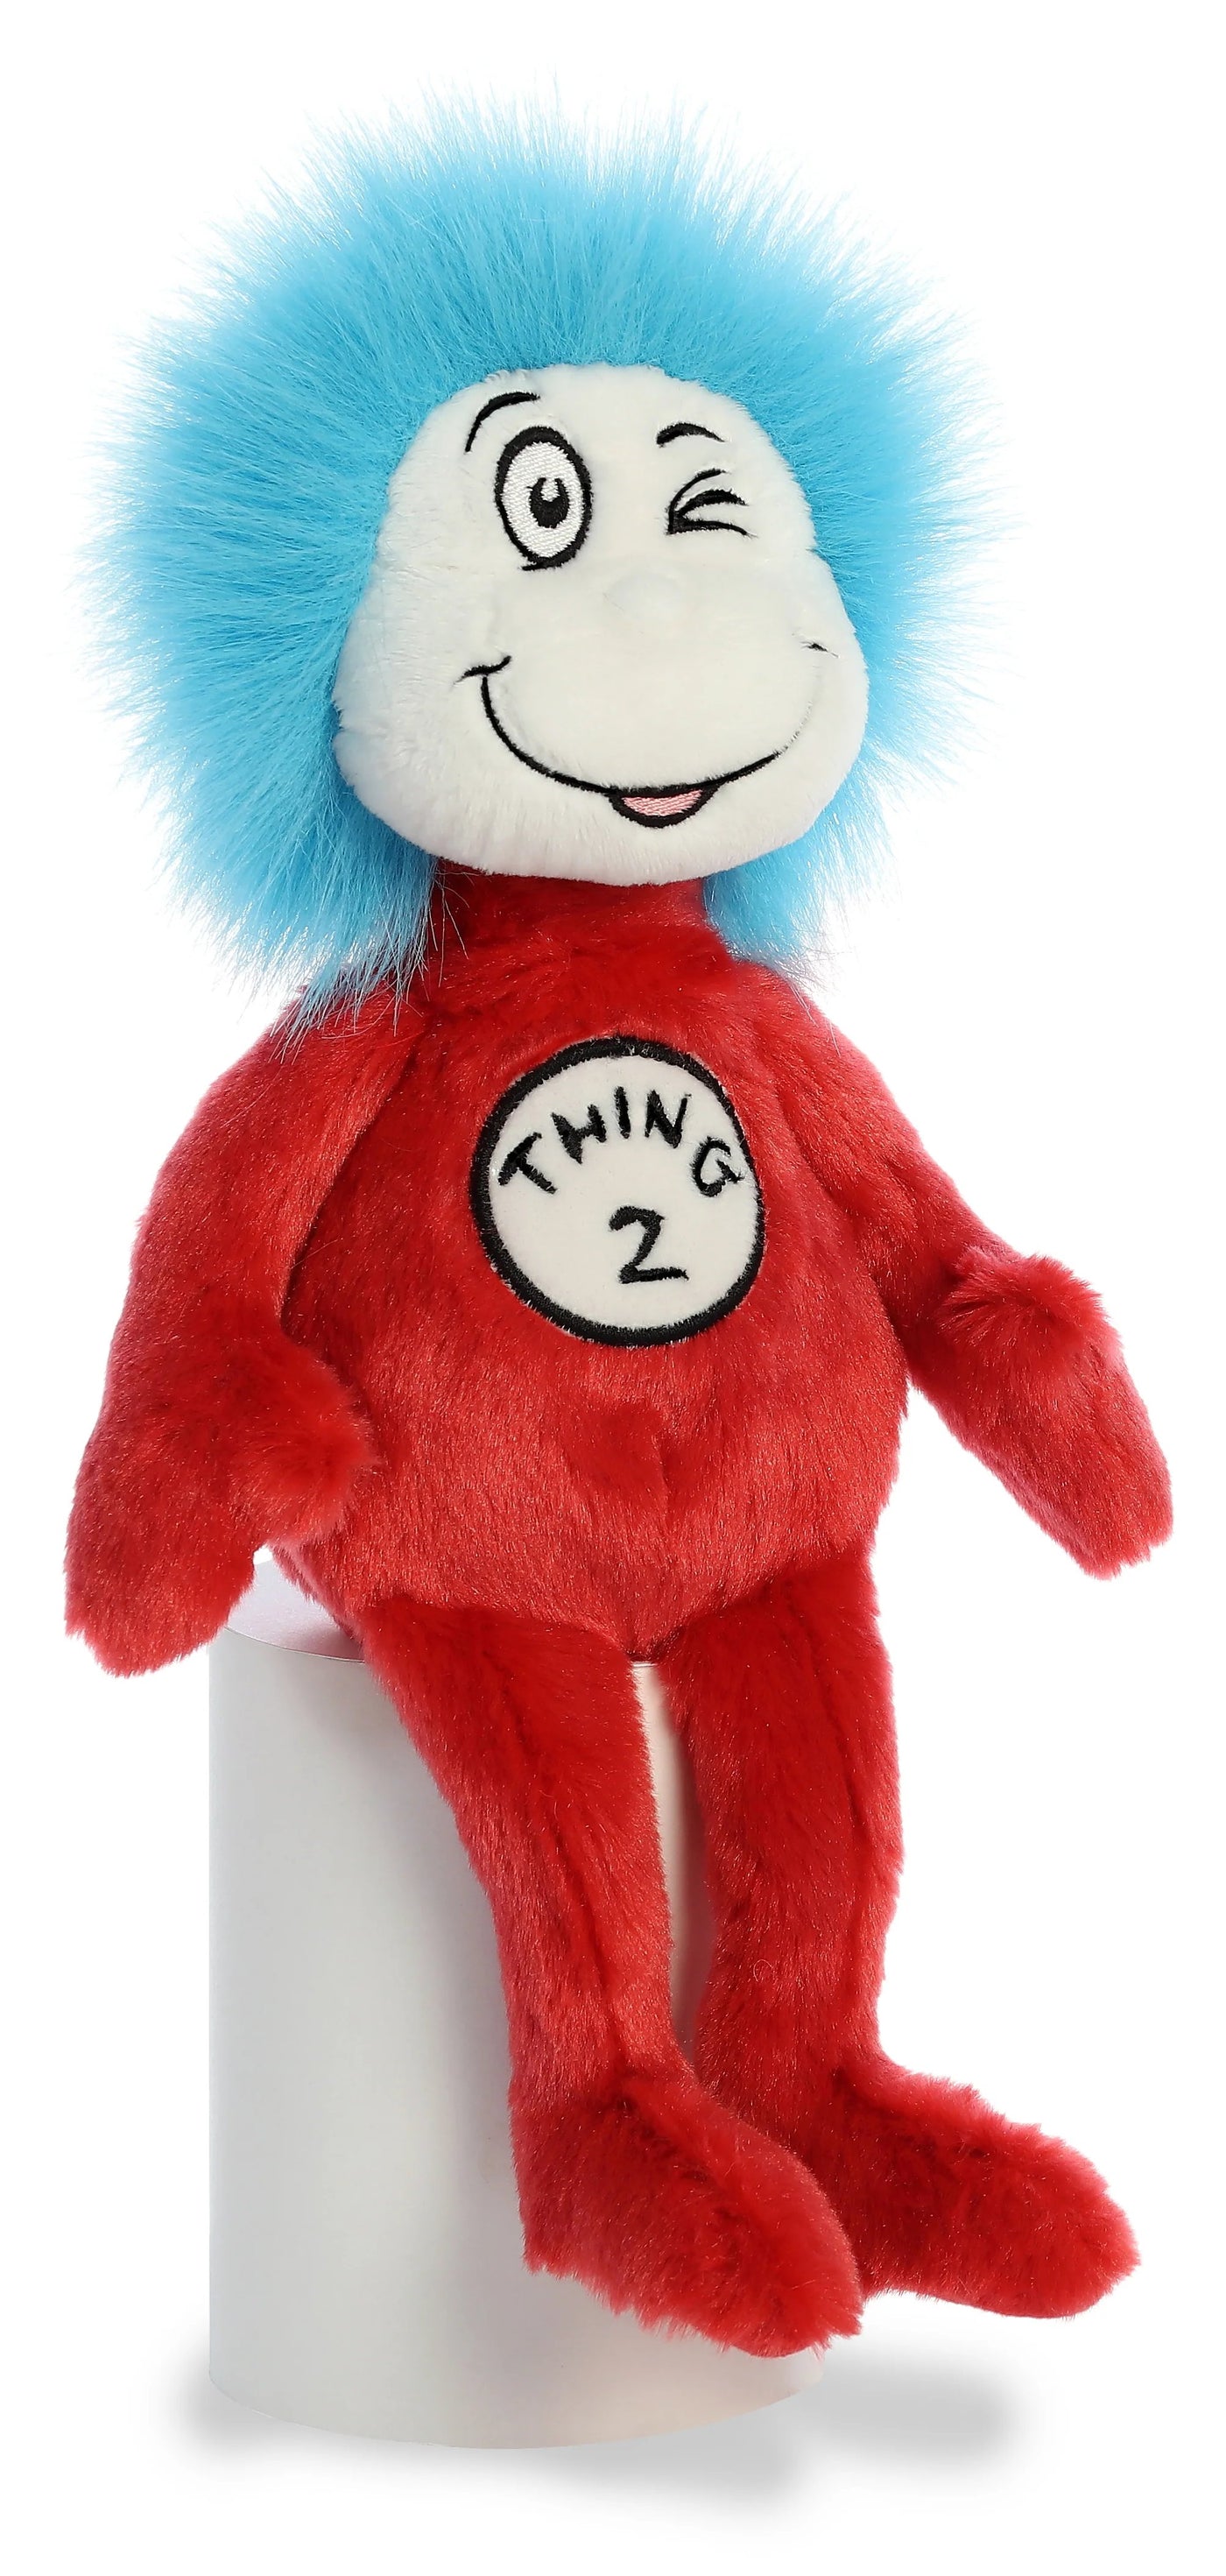 Aurora Dr. Seuss The Cat in the Hat 12" Thing 2 Plush Toy - Sitting